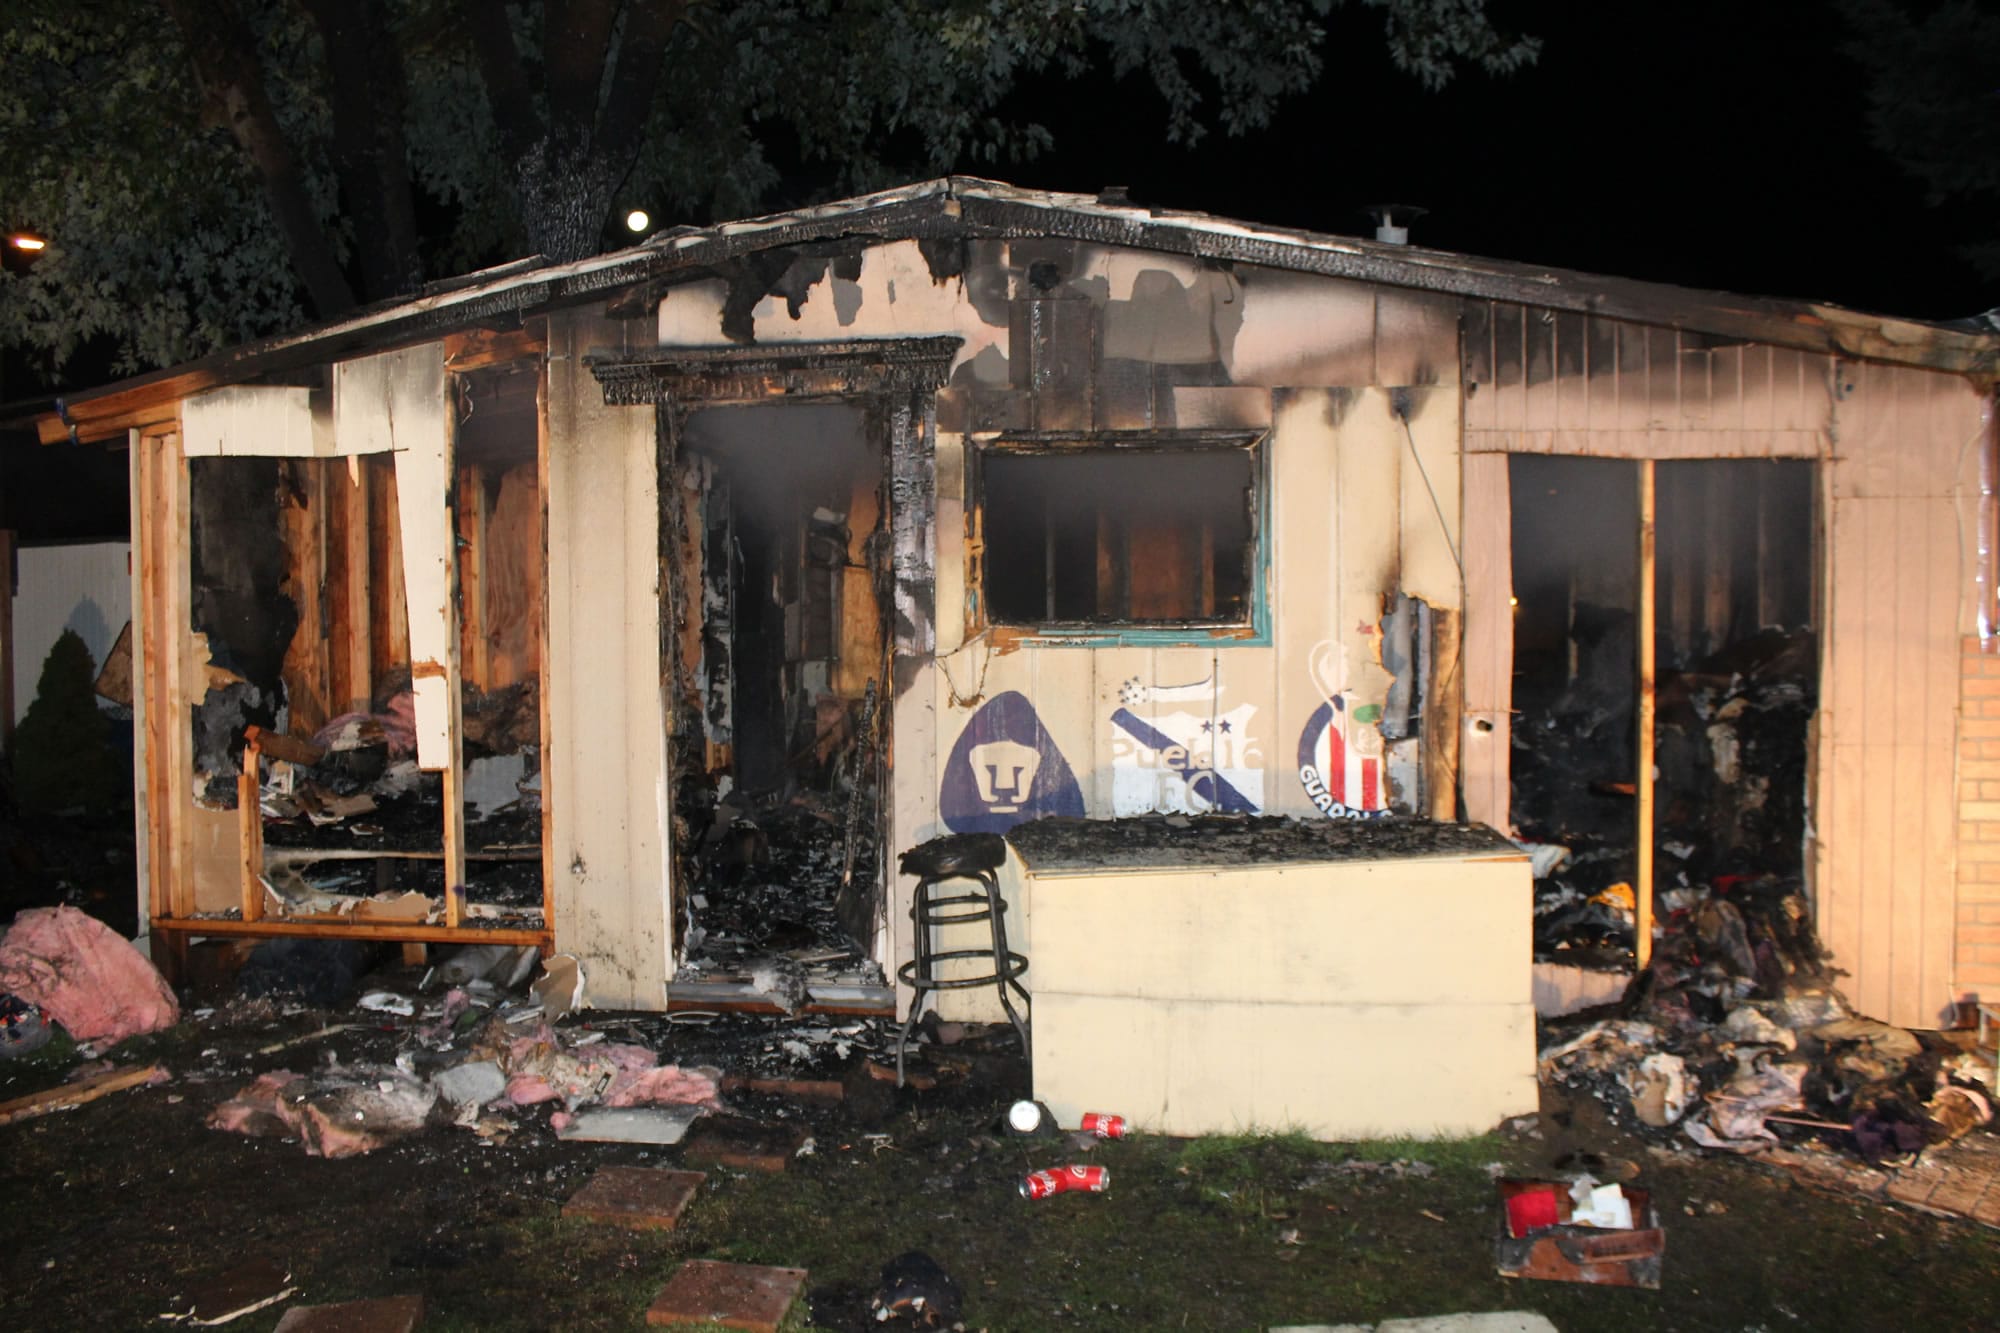 A candle left unattended caused significant damage to an outbuilding, which was being used as a residence.